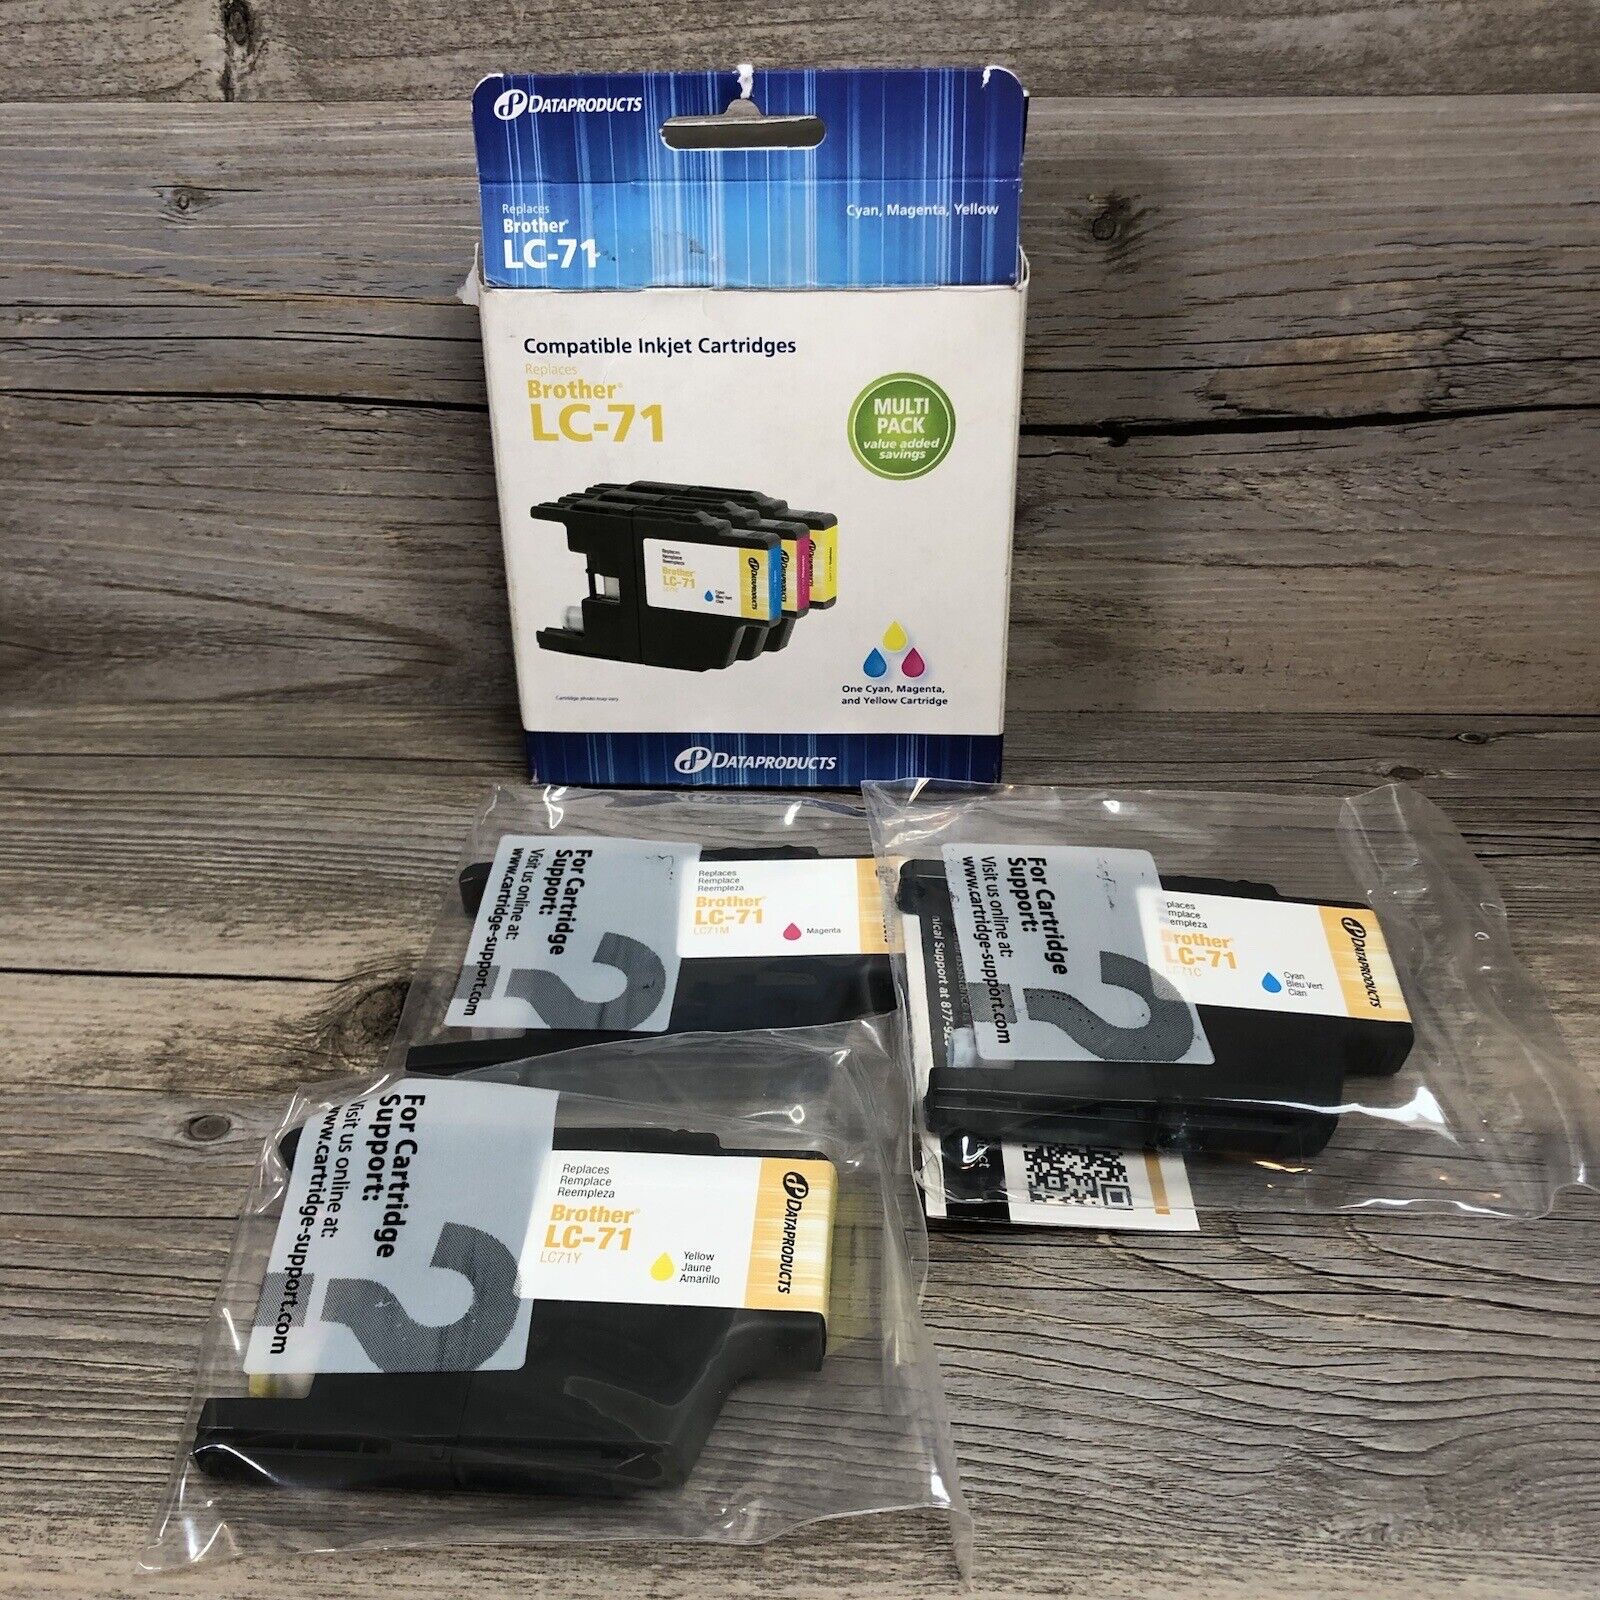 Alternative for Brother LC-71 C/M/Y, Dataproducts Brand Black Inkjet Cartridge